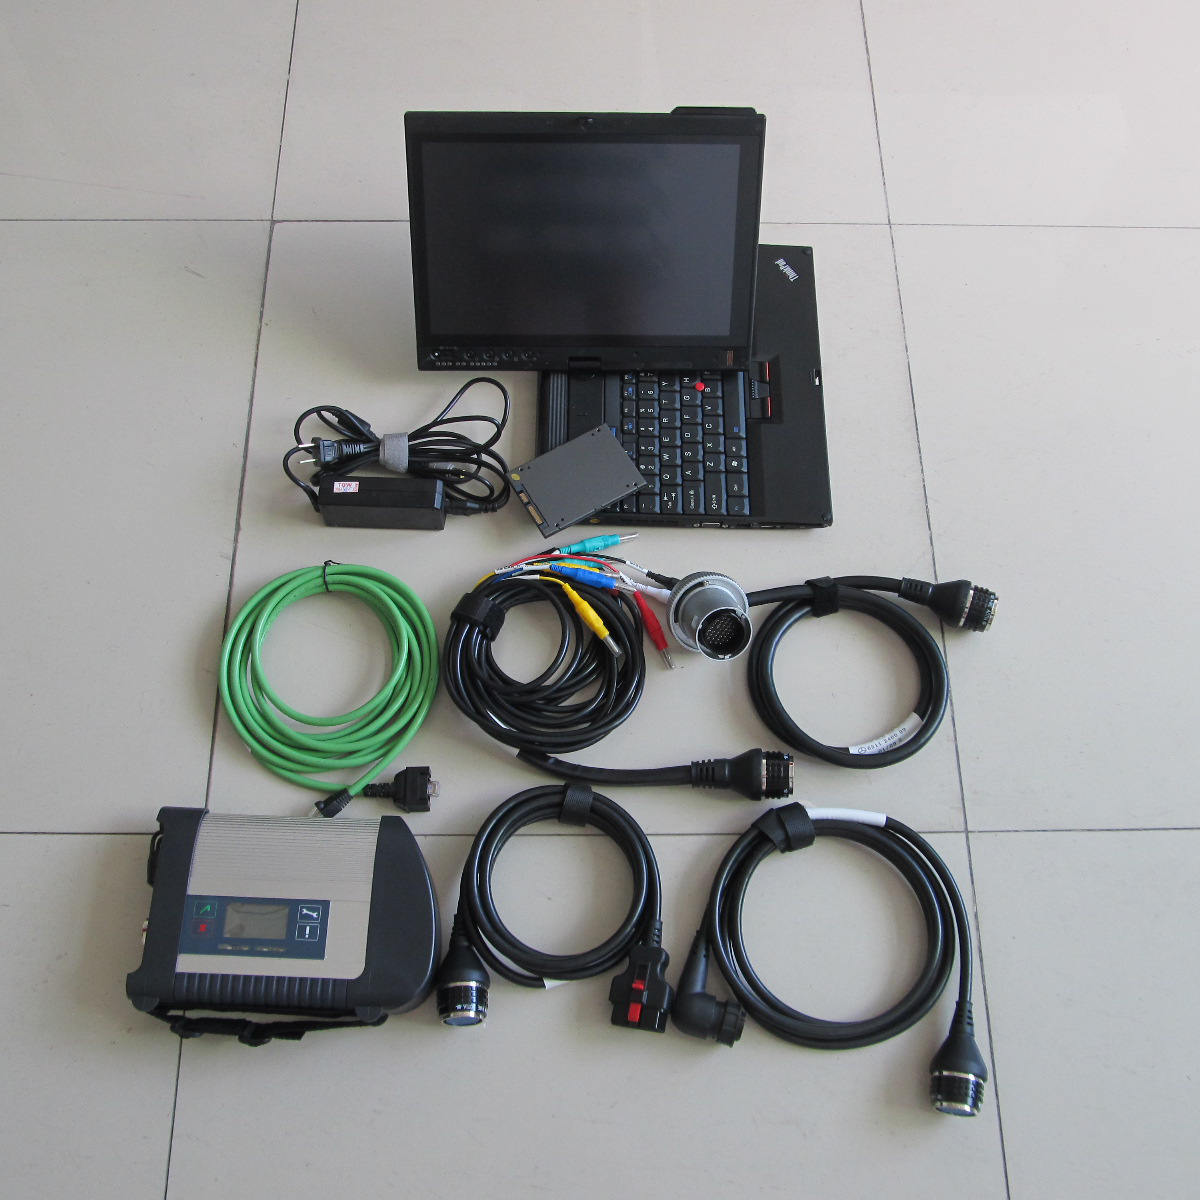 

2022.06 MB Star C4 MB SD connect Compact 4 diagnosis tool installed in SSD X-ENTRY DAS X200T Laptop